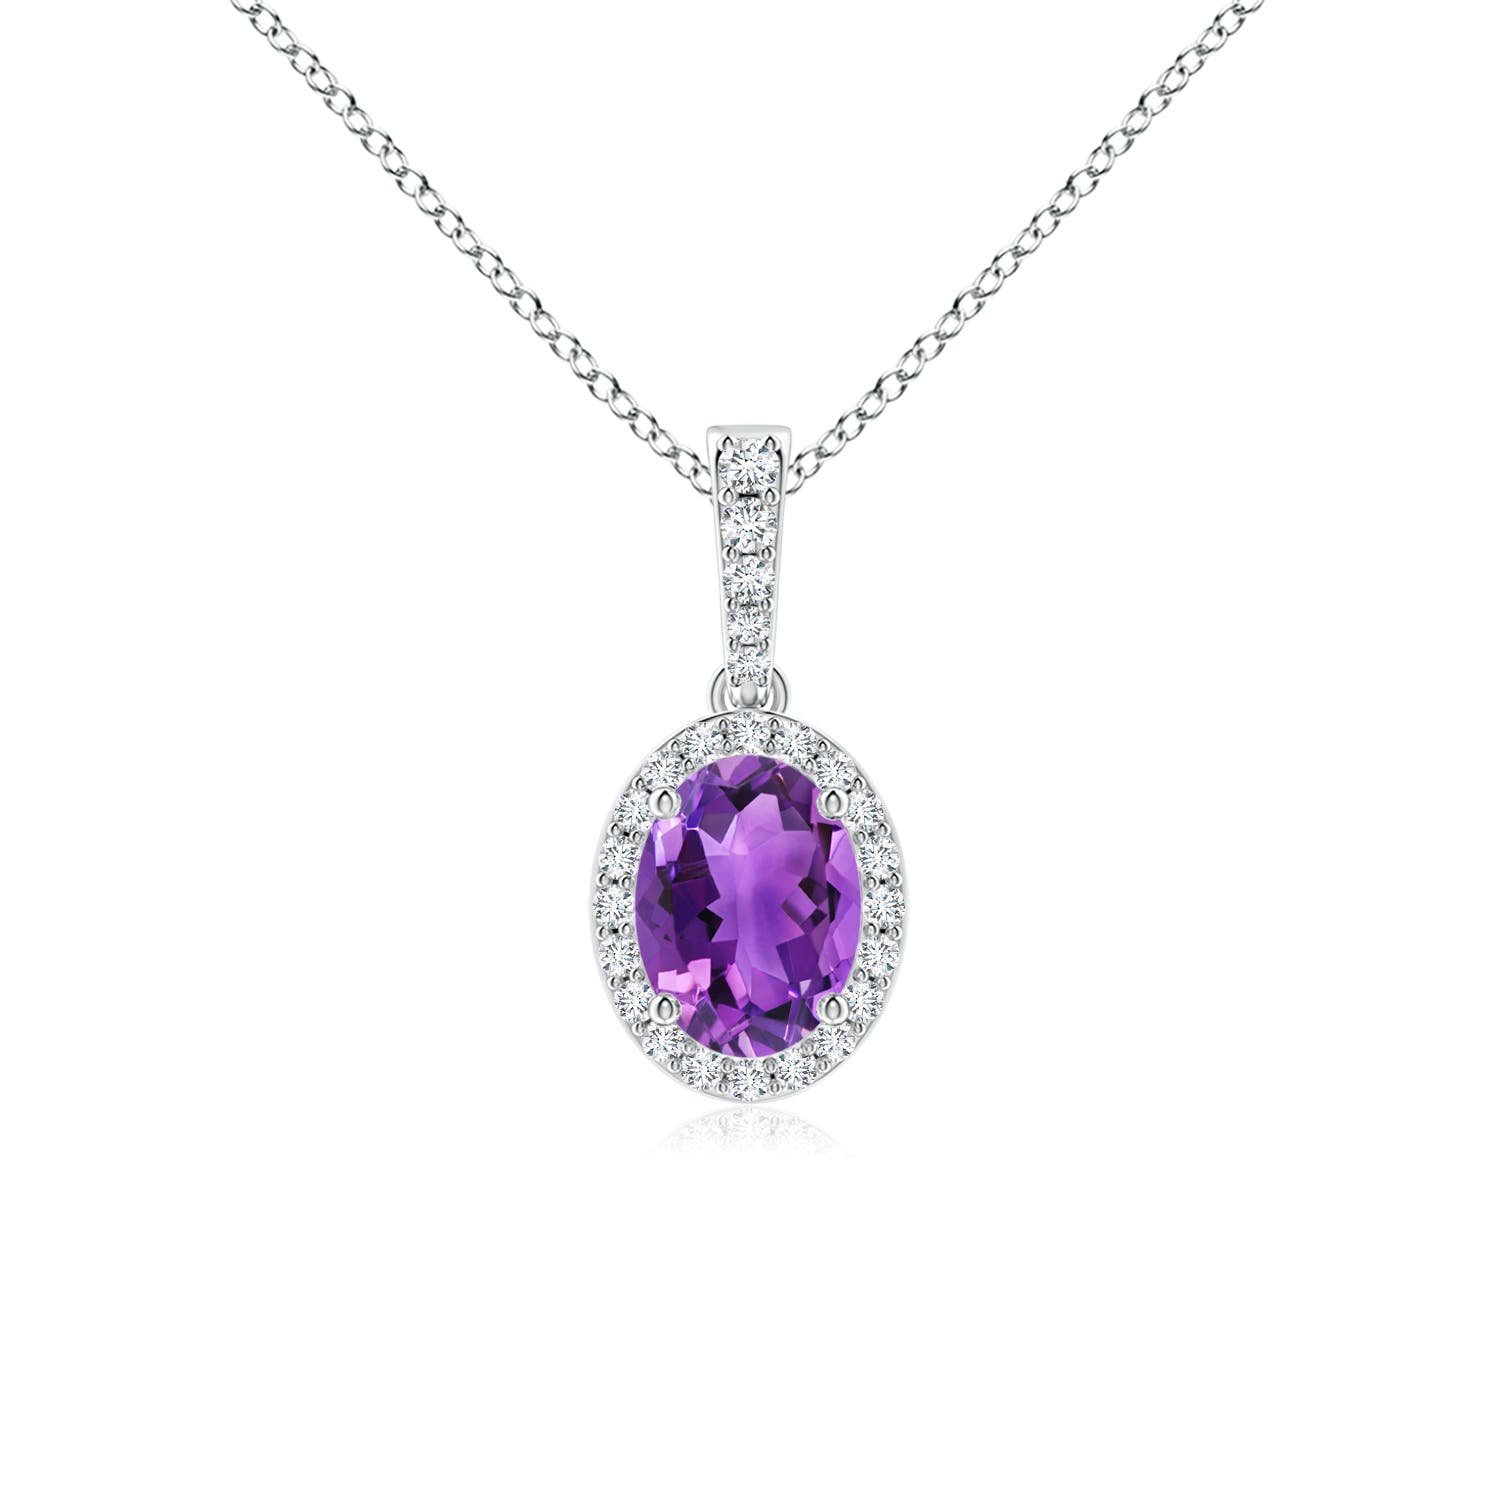 AAA - Amethyst / 1.34 CT / 14 KT White Gold